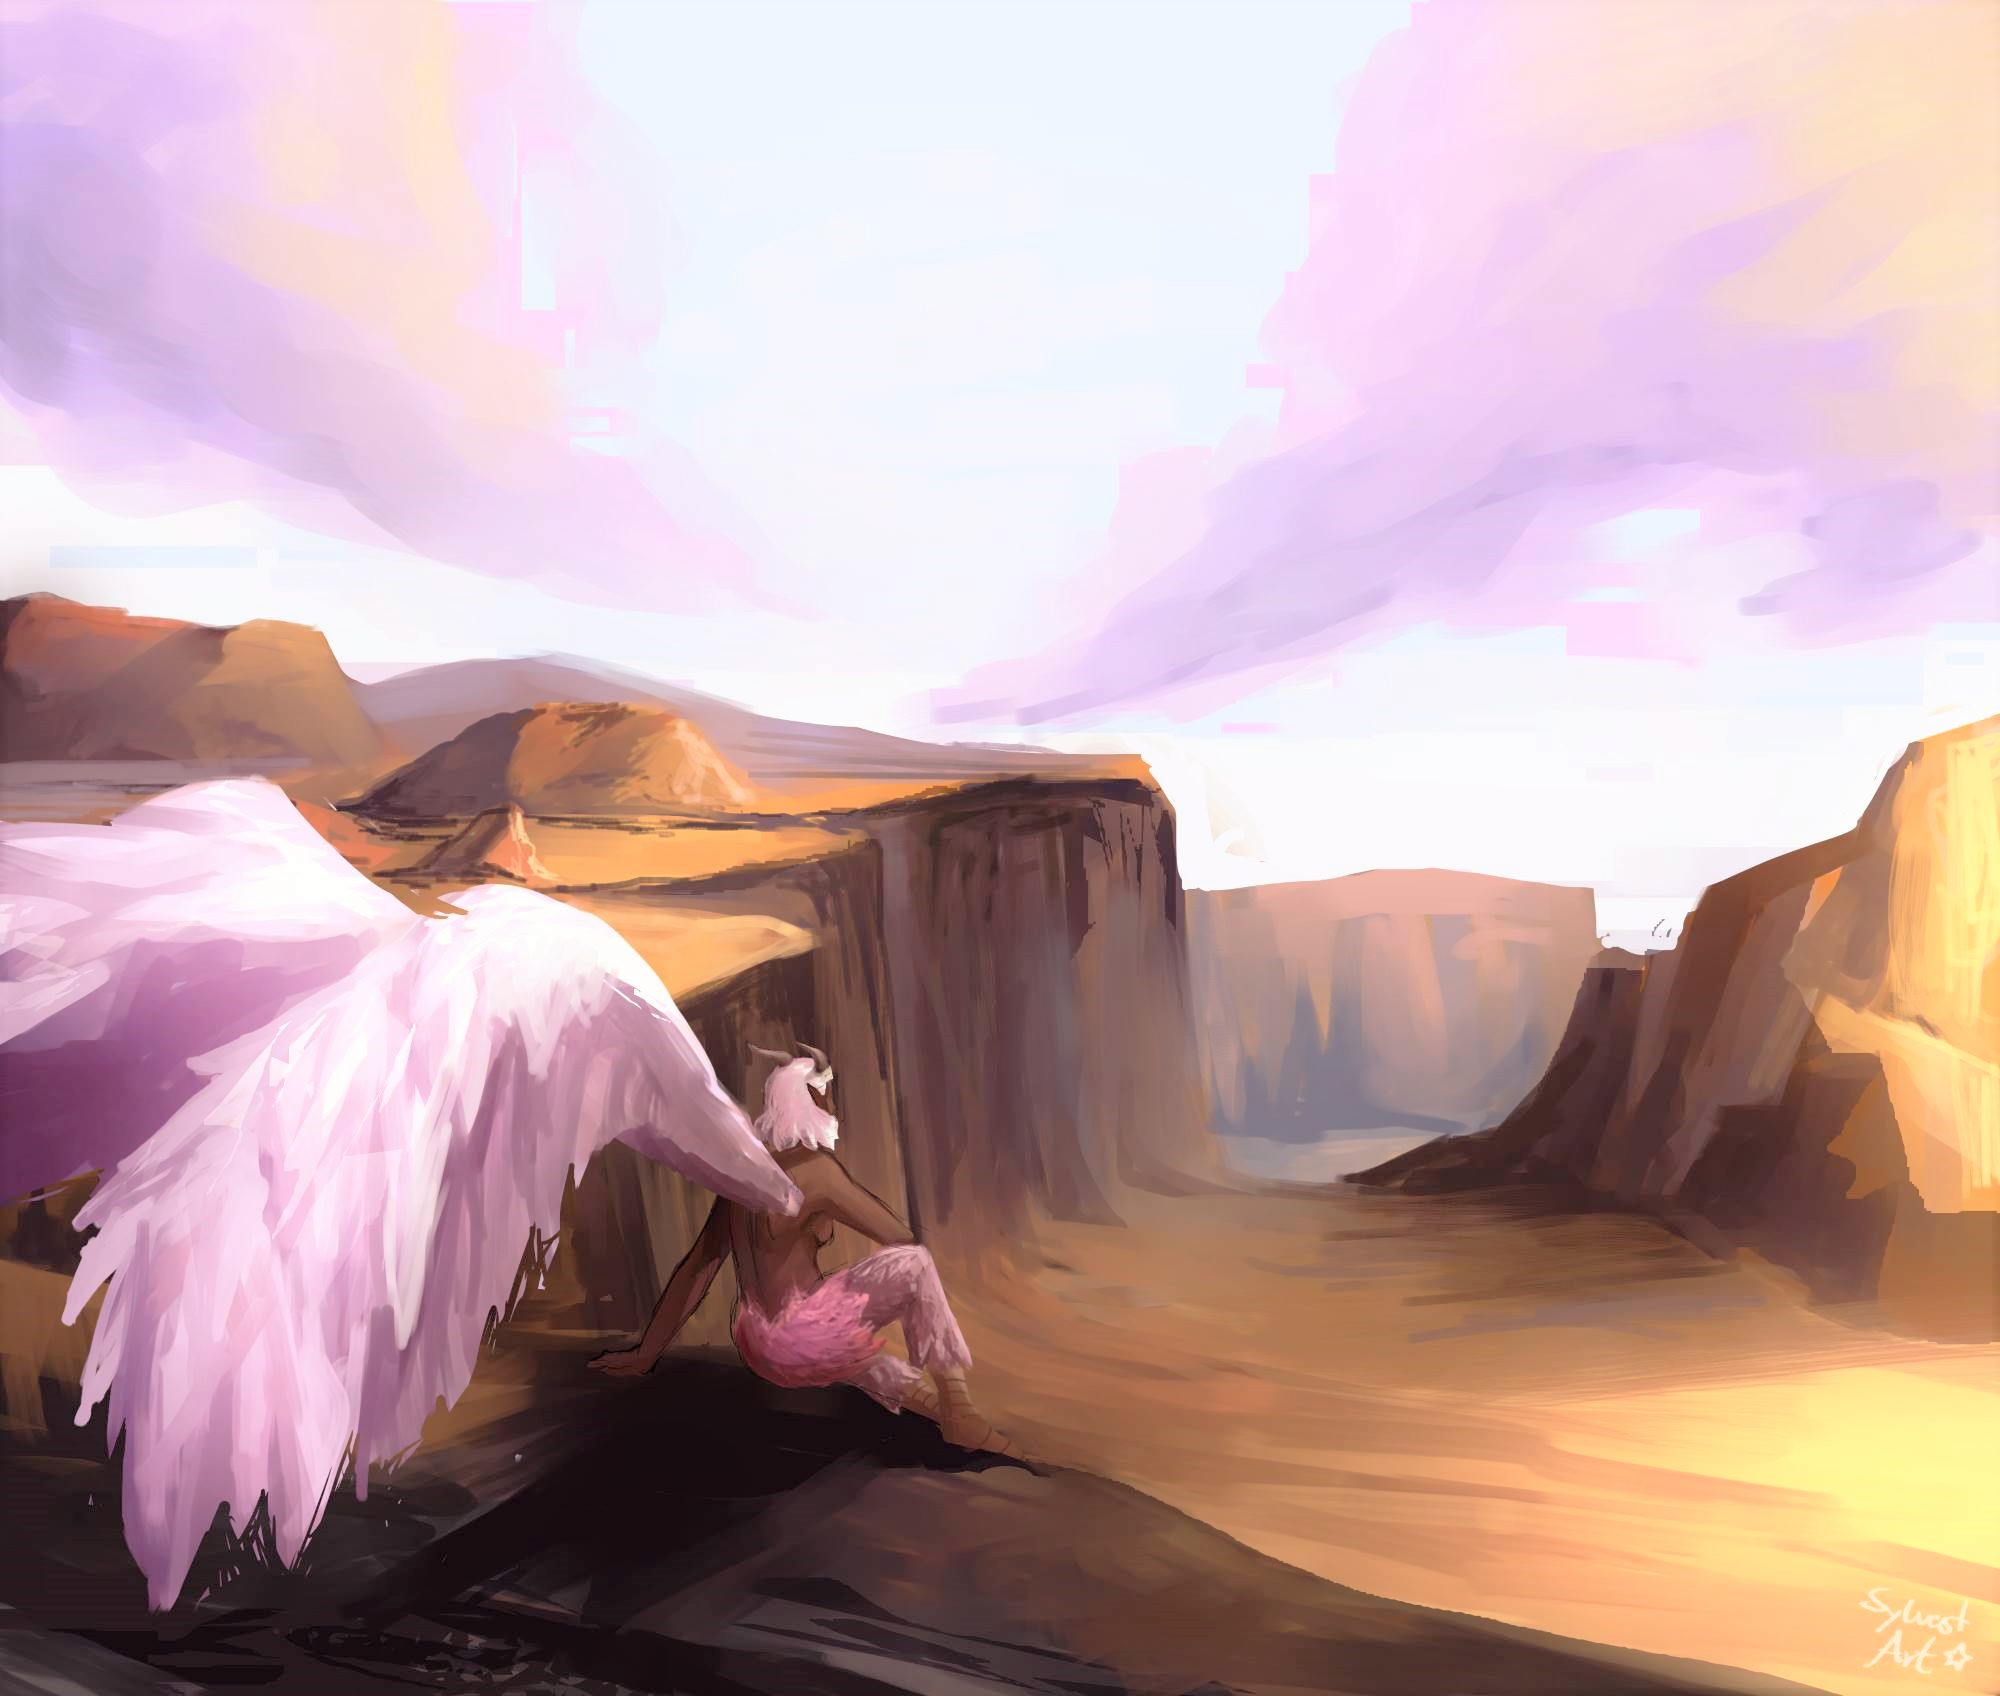 Winged Person looking into a canyon